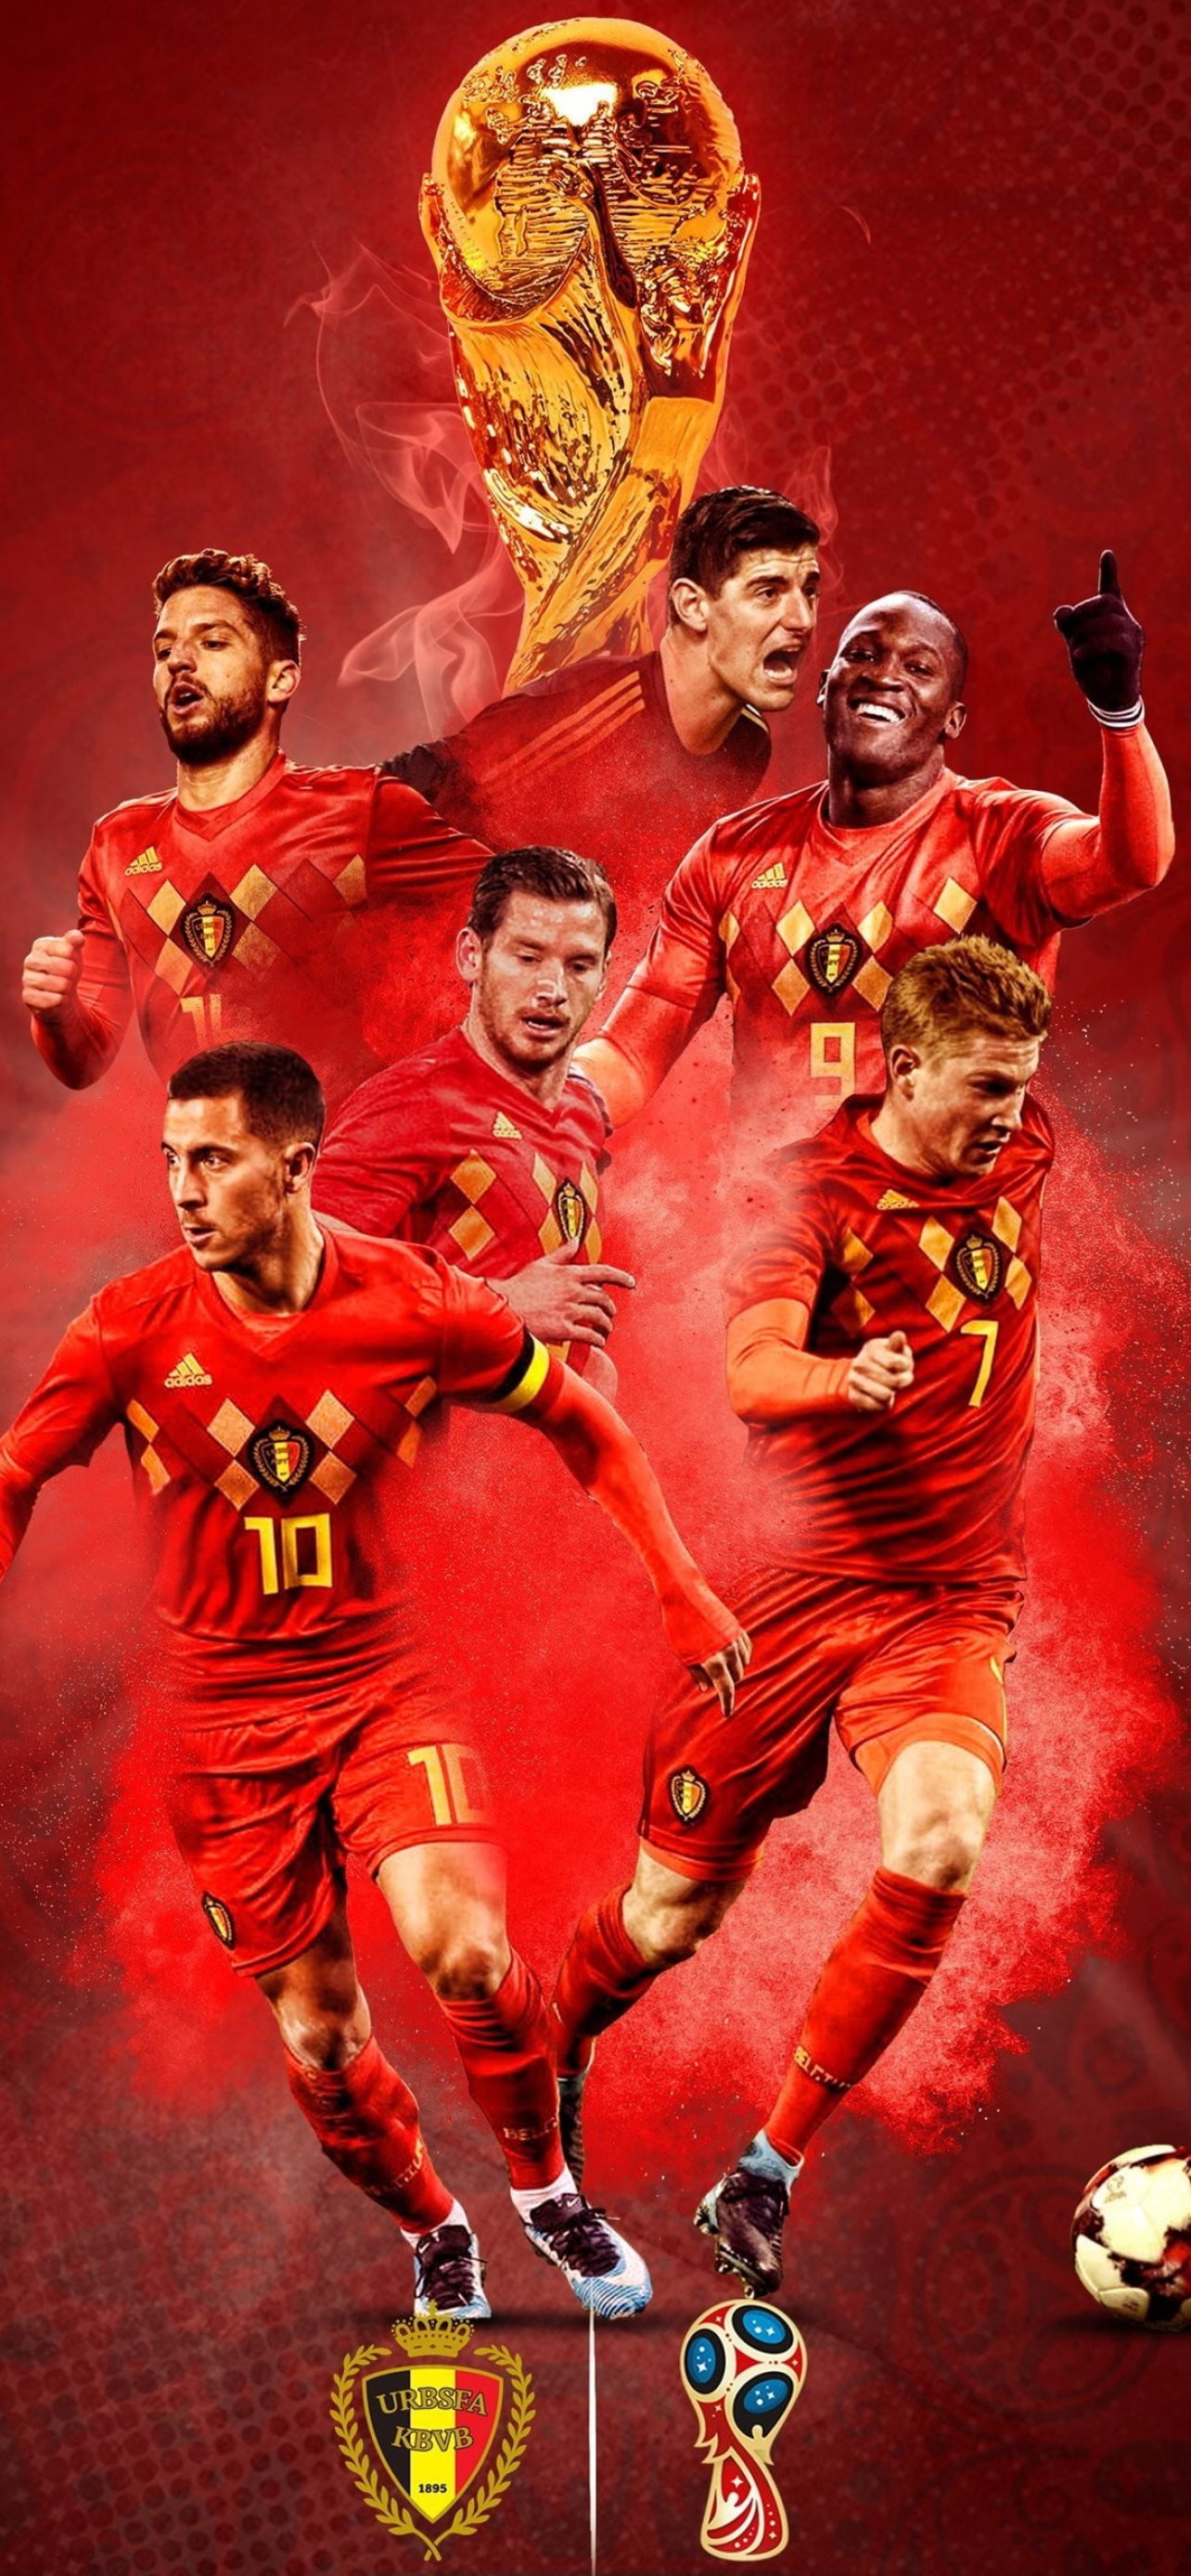 Germany national team, Football excellence, Powerhouse of Europe, Team unity, 1290x2780 HD Handy